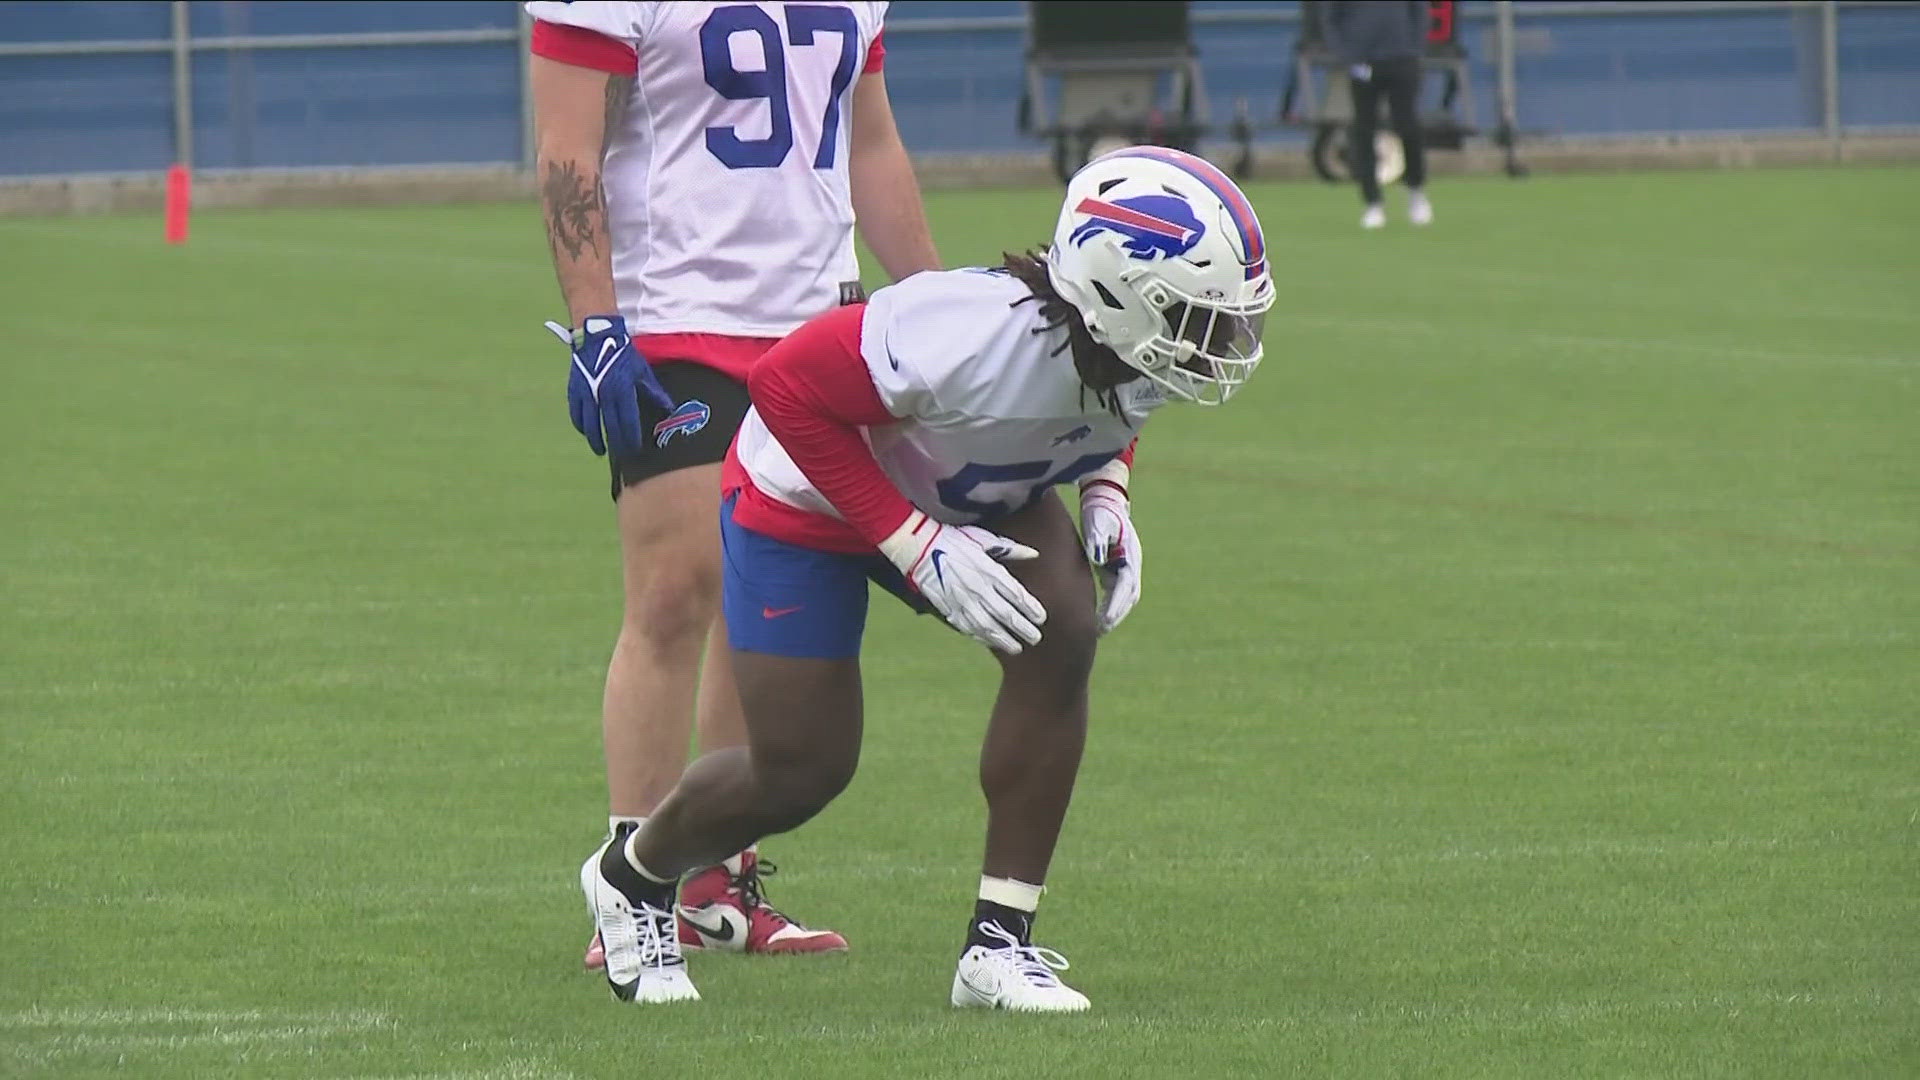 A 5th-round selection, defensive end Javon Solomon expressed his excitement to be a part of the Bills organization at rookie minicamp this weekend.